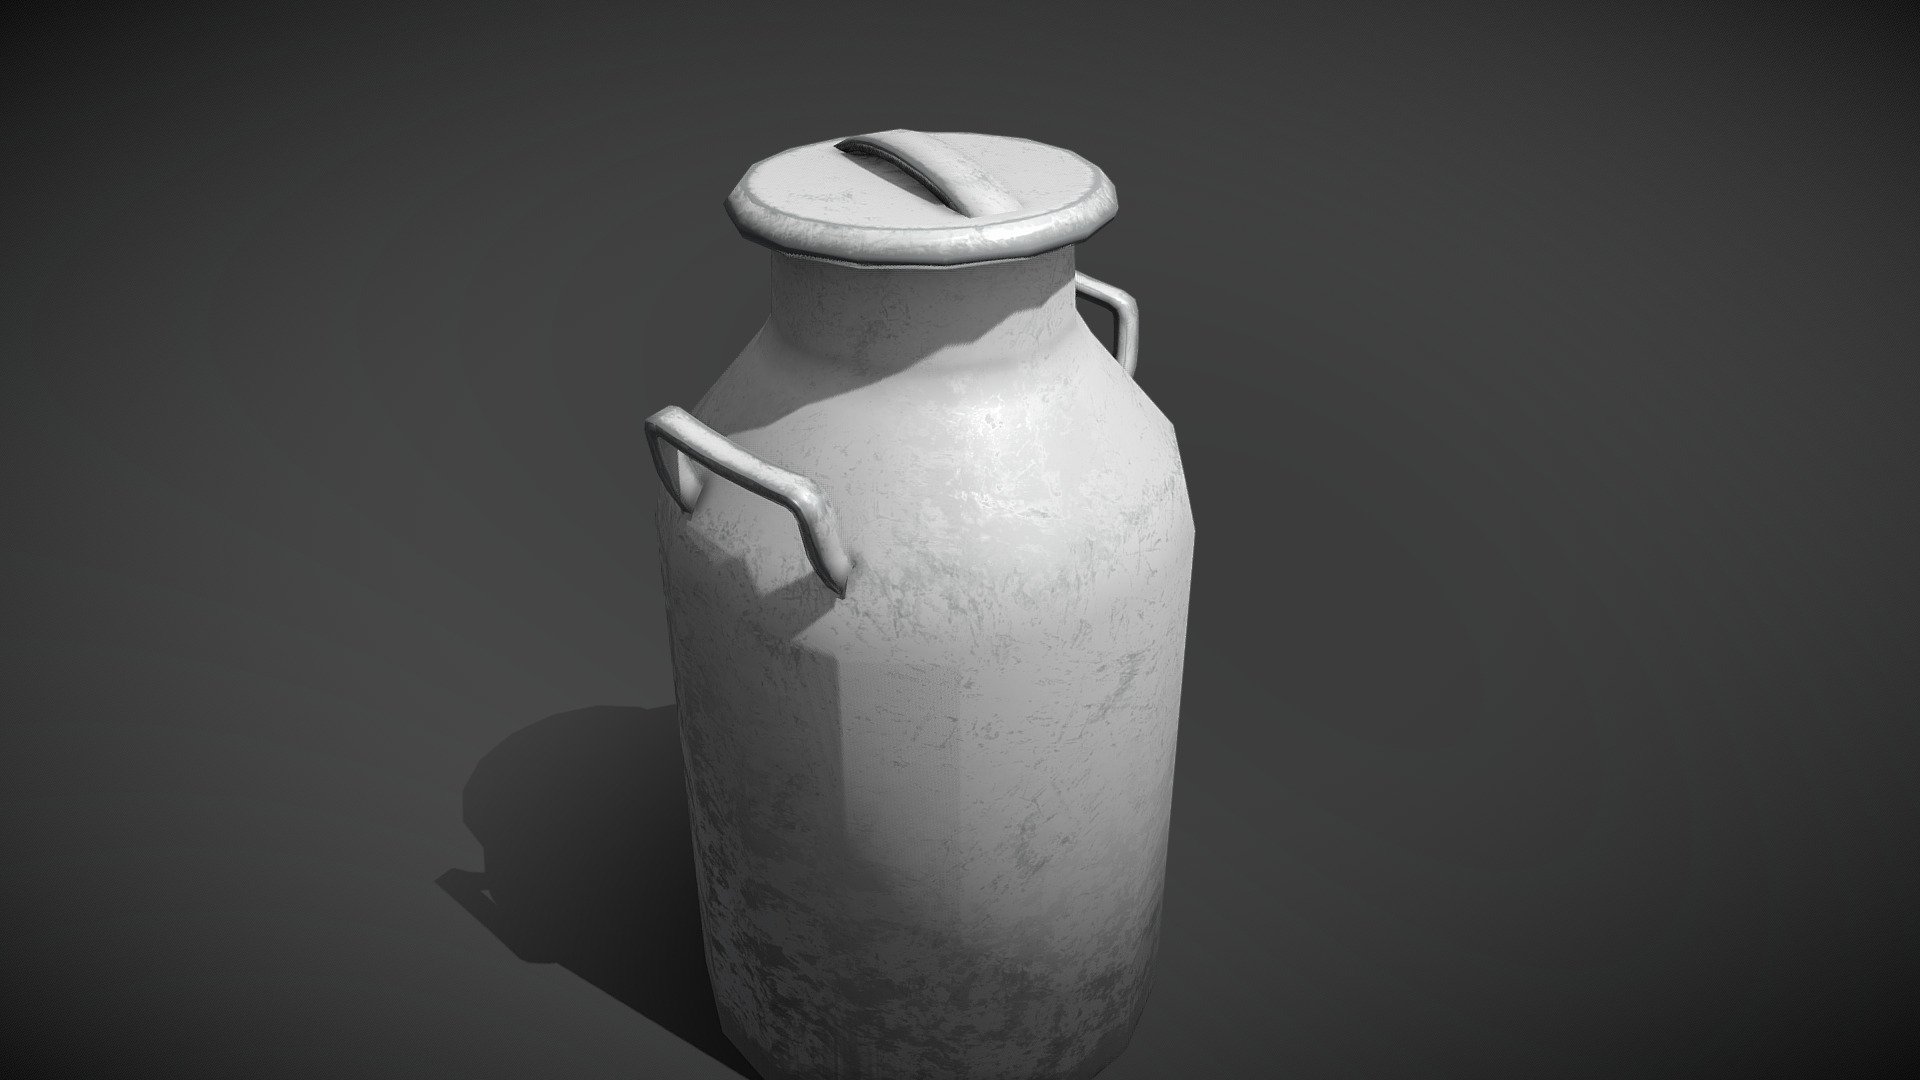 This meticulously crafted 3D model represents a vintage-grade milk can, a classic symbol of dairy farming and rural life. The model faithfully captures the physical attributes and intricate details of this iconic container.

Details:

Embossed Logo: An embossed logo or branding from the original manufacturer is featured prominently on the side of the milk can.
    Weathered Surface: The surface of the milk can exhibits natural weathering, scratches, and imperfections, reflecting its long history of use on the farm.
    Rivets: Small rivets, used in the construction of the milk can, are faithfully reproduced for added realism.
    Denting: Minor dents and dings from years of service add character to the model.
    Rust: Subtle rust spots and streaks are included to convey the effects of time and exposure to the elem

Note:

Please ensure that you have the necessary permissions to use and distribute any 3D models or designs based on copyrighted products or trademarks 3d model